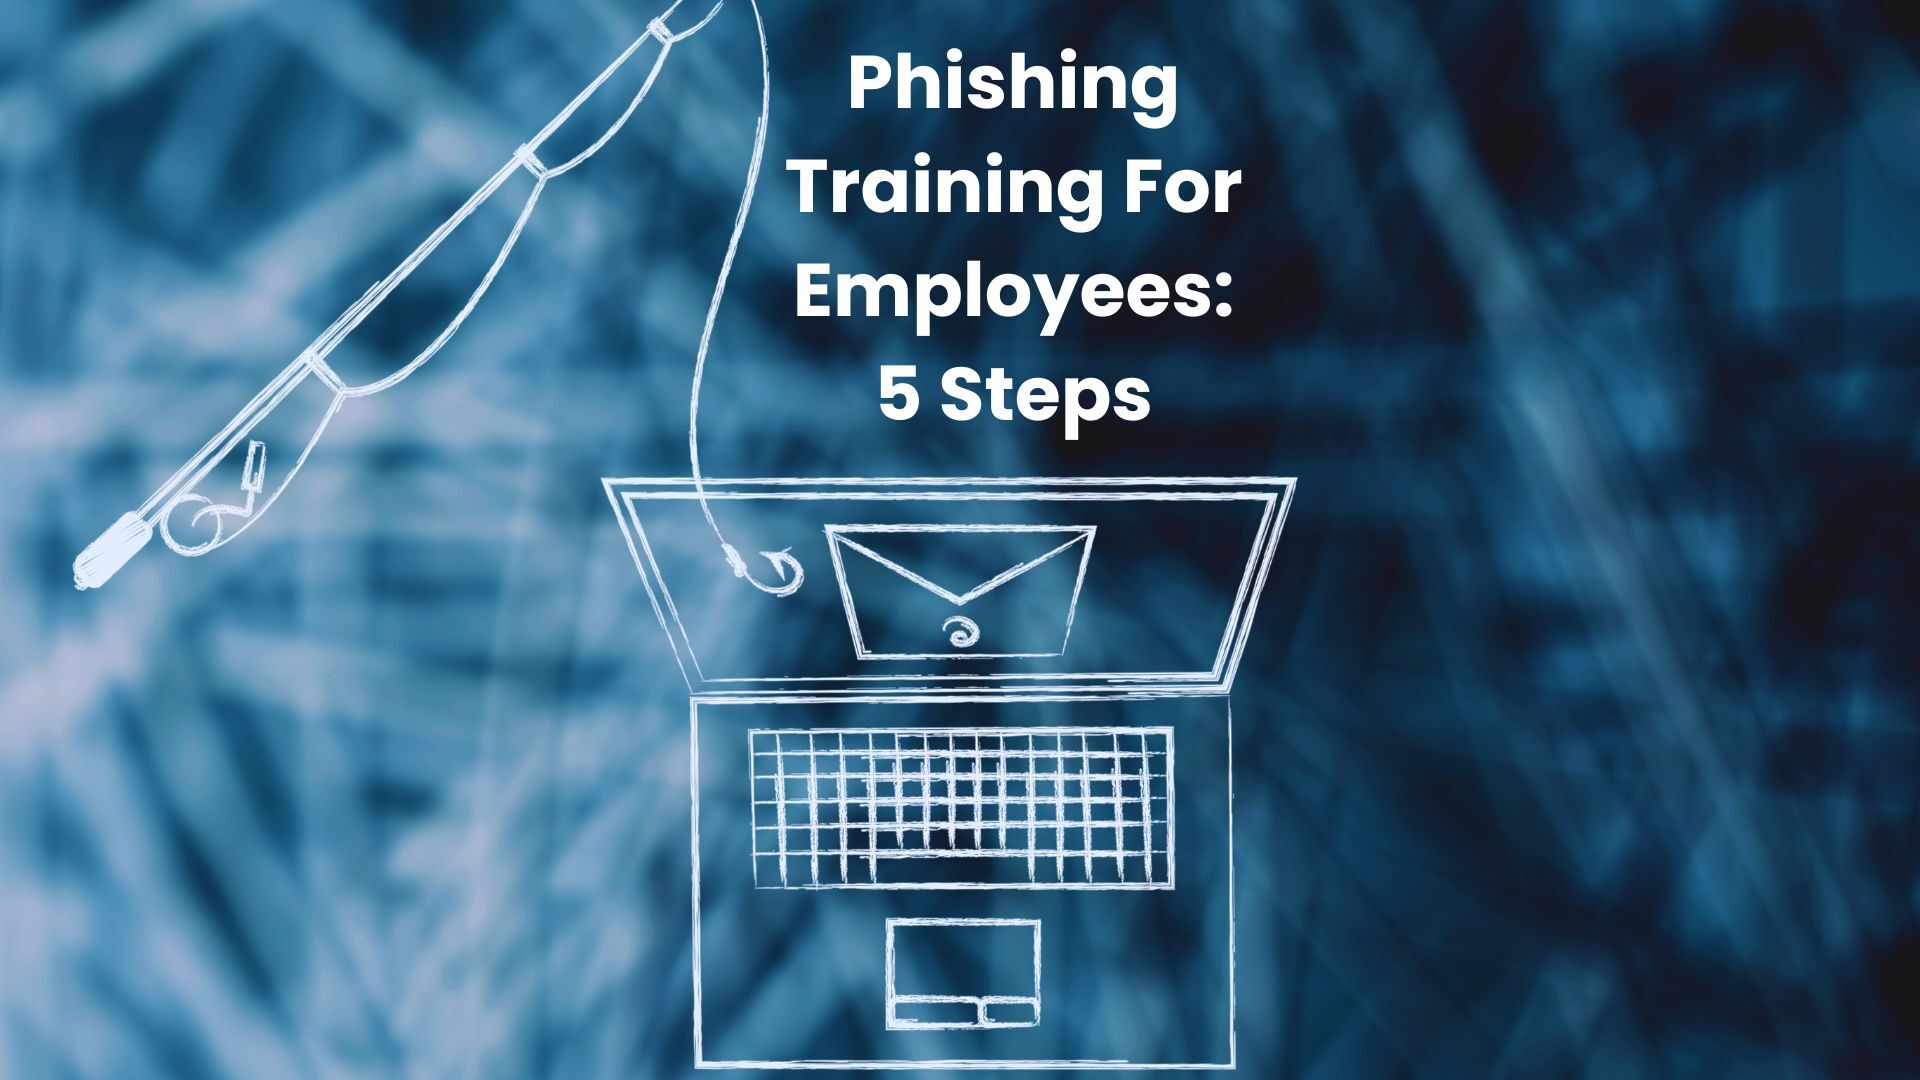 Phishing Training For Employees - 5 Steps To Success